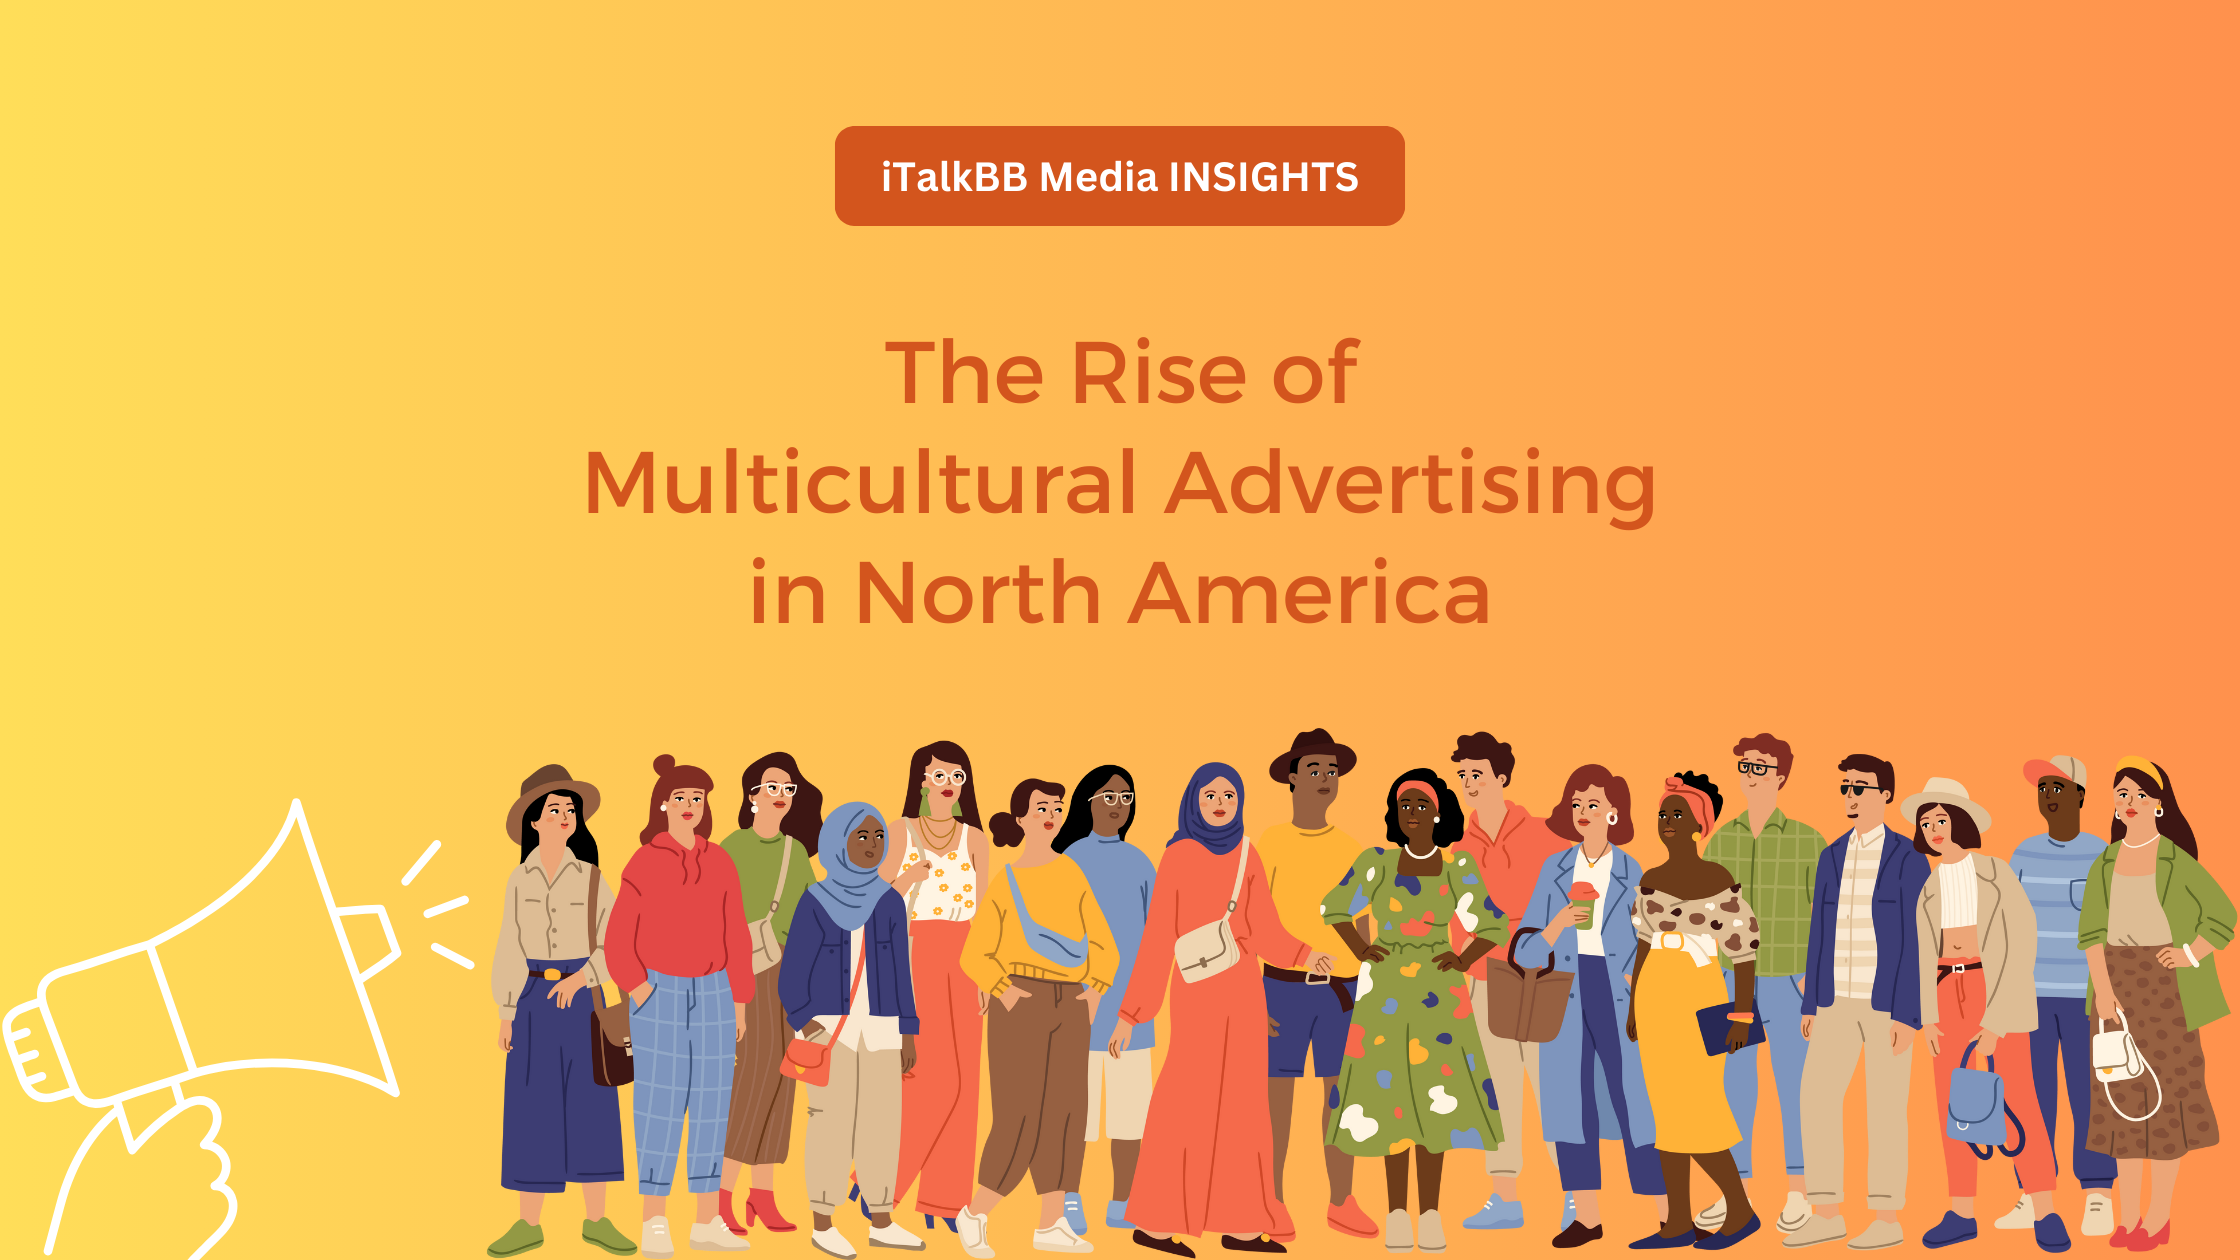 The Rise of Multicultural Advertising in North America